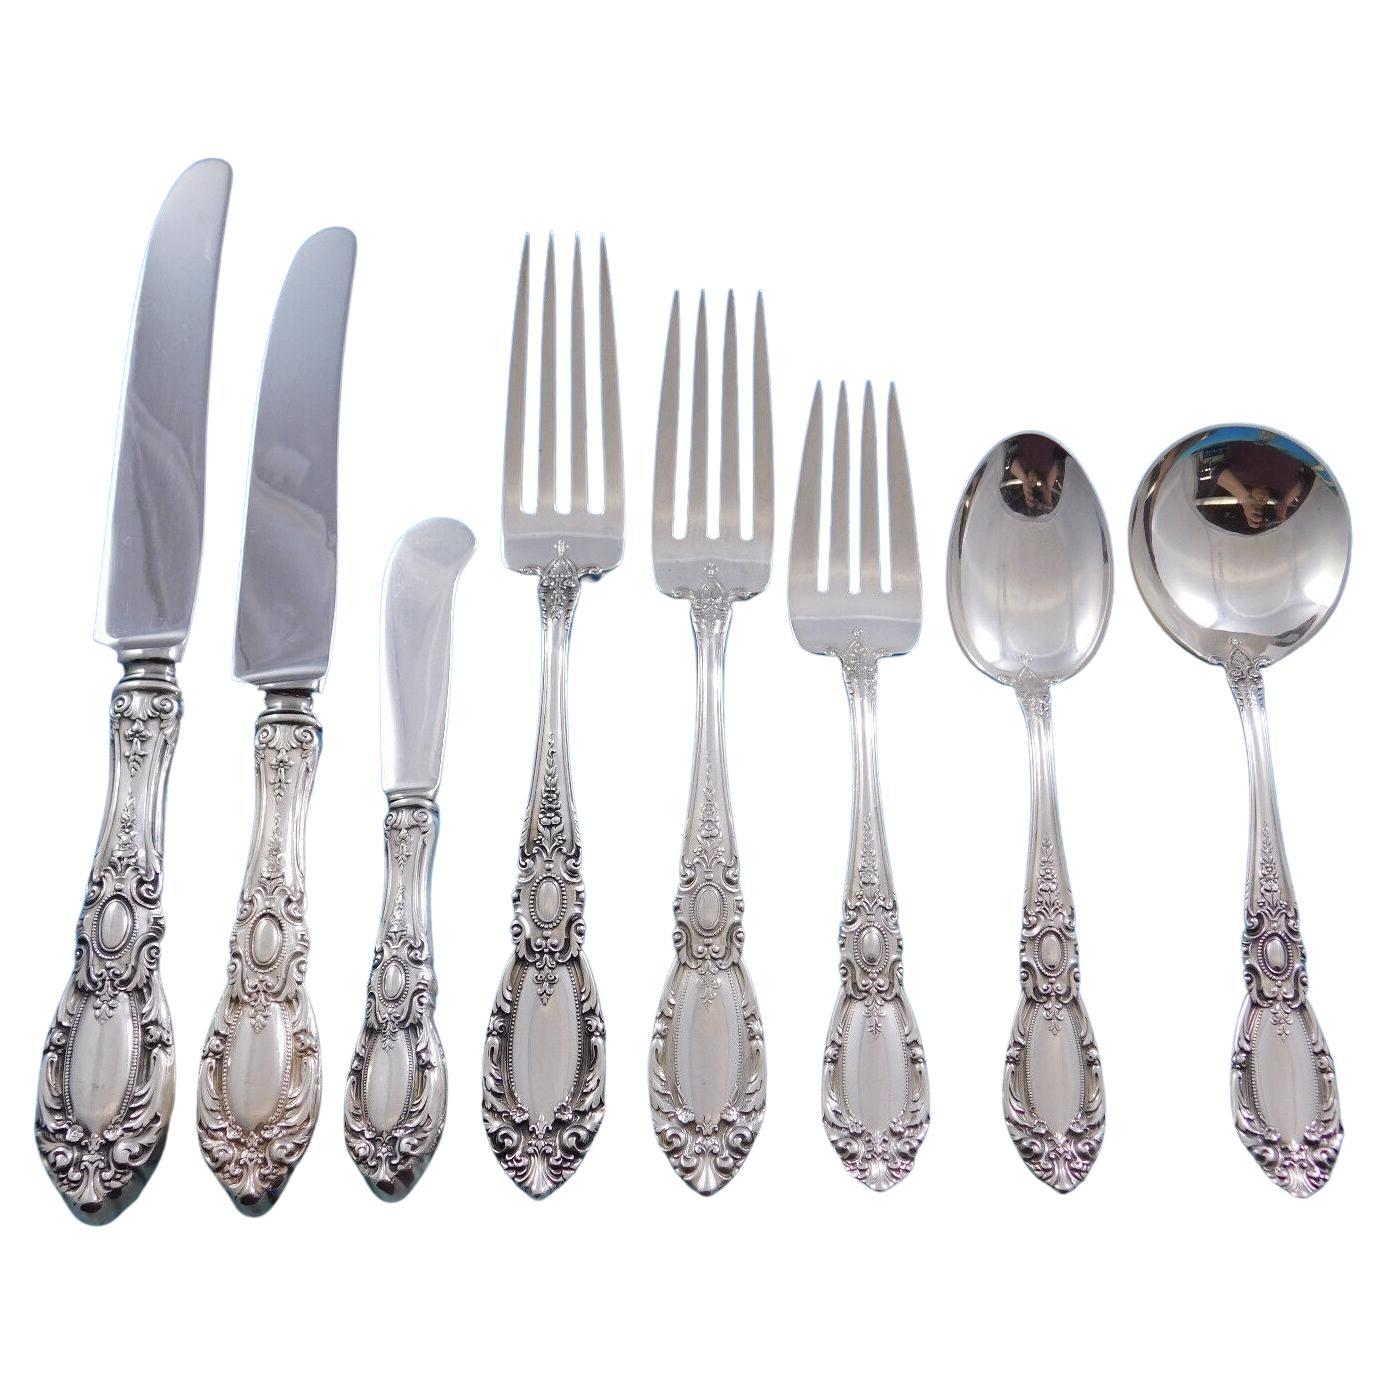 King Richard by Towle Sterling Silver Flatware Set 12 Service 108 Pc Dinner Size For Sale